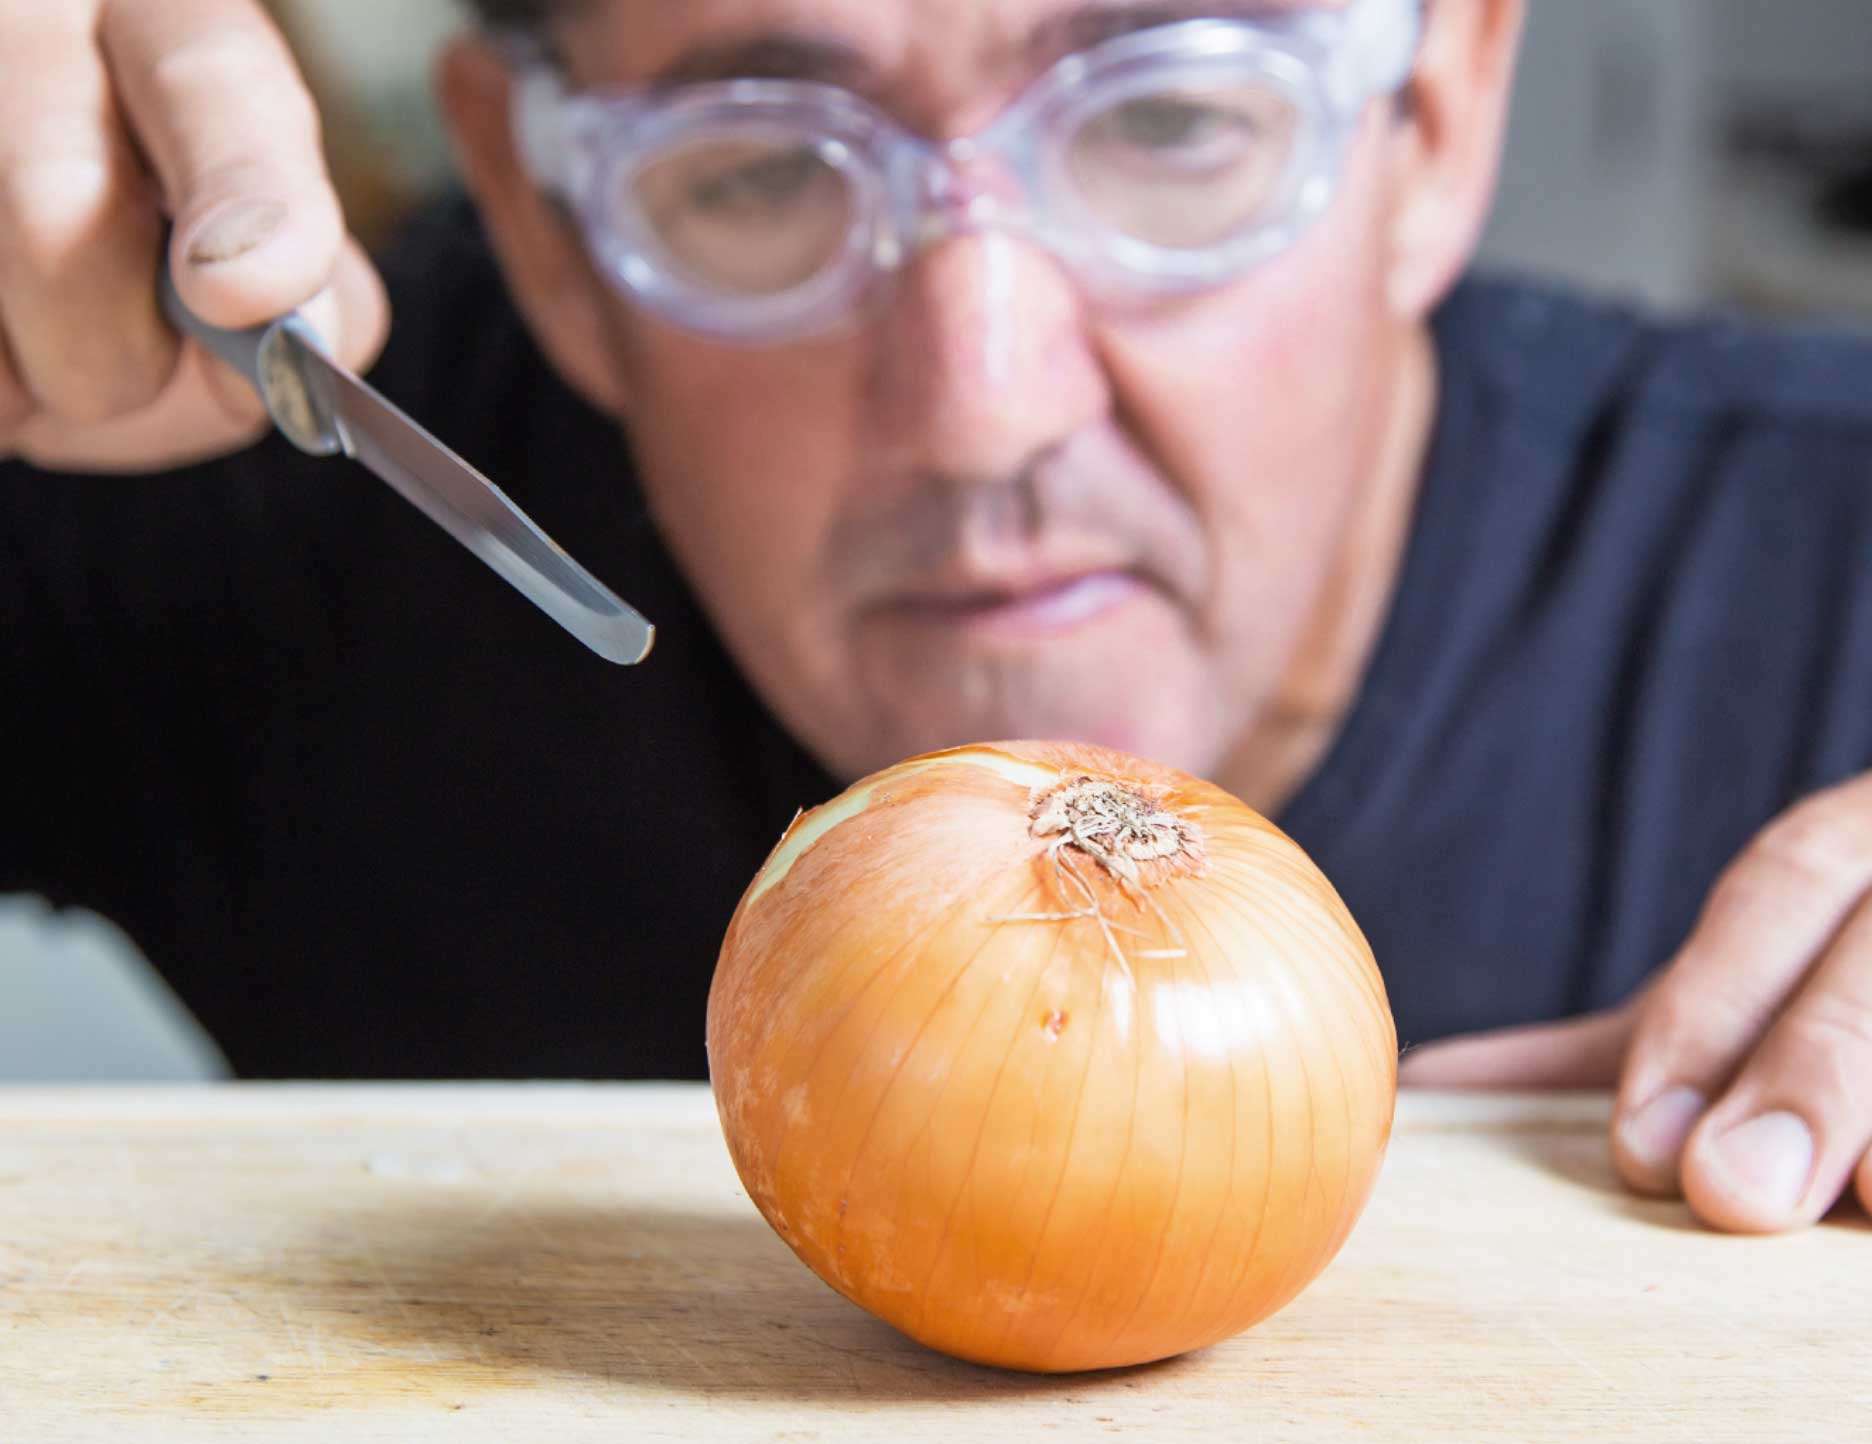 how-to-cut-onions-without-burning-your-eyes